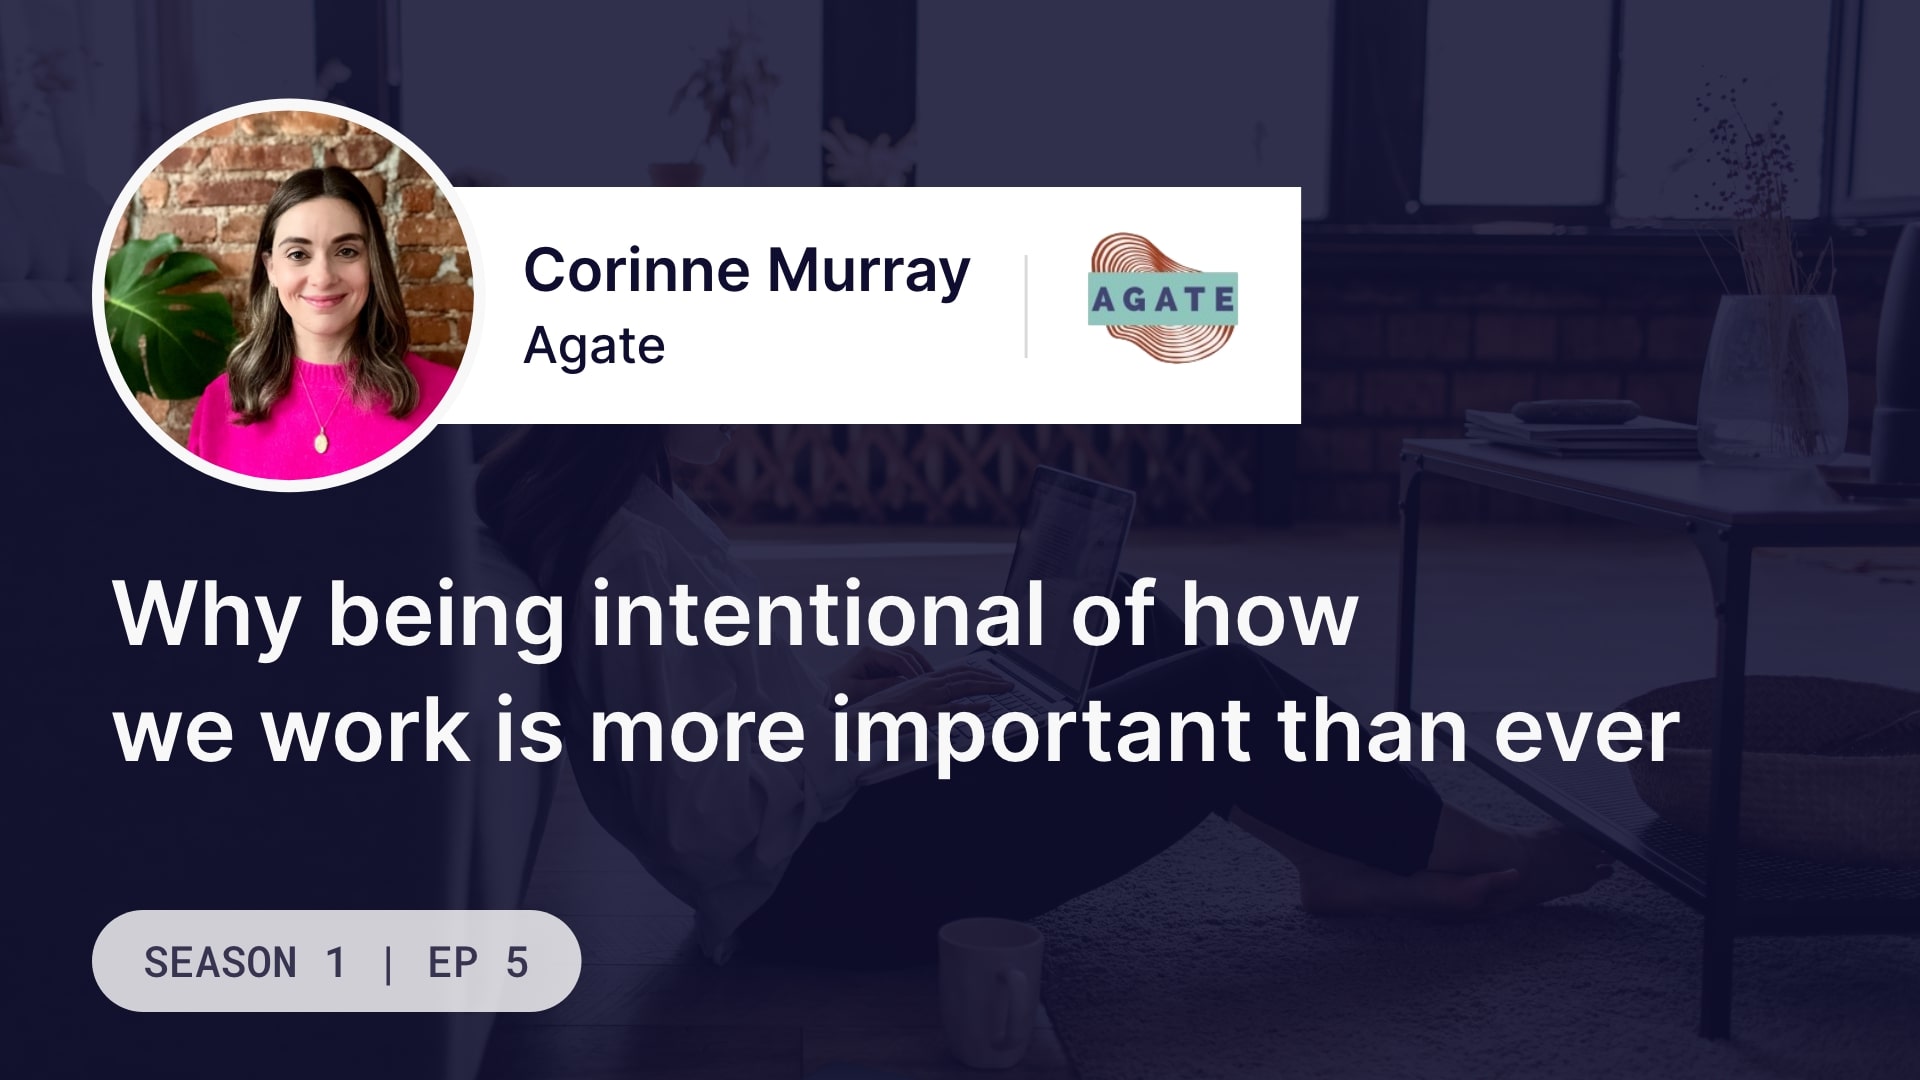 Why being intentional of how we work is more important than ever